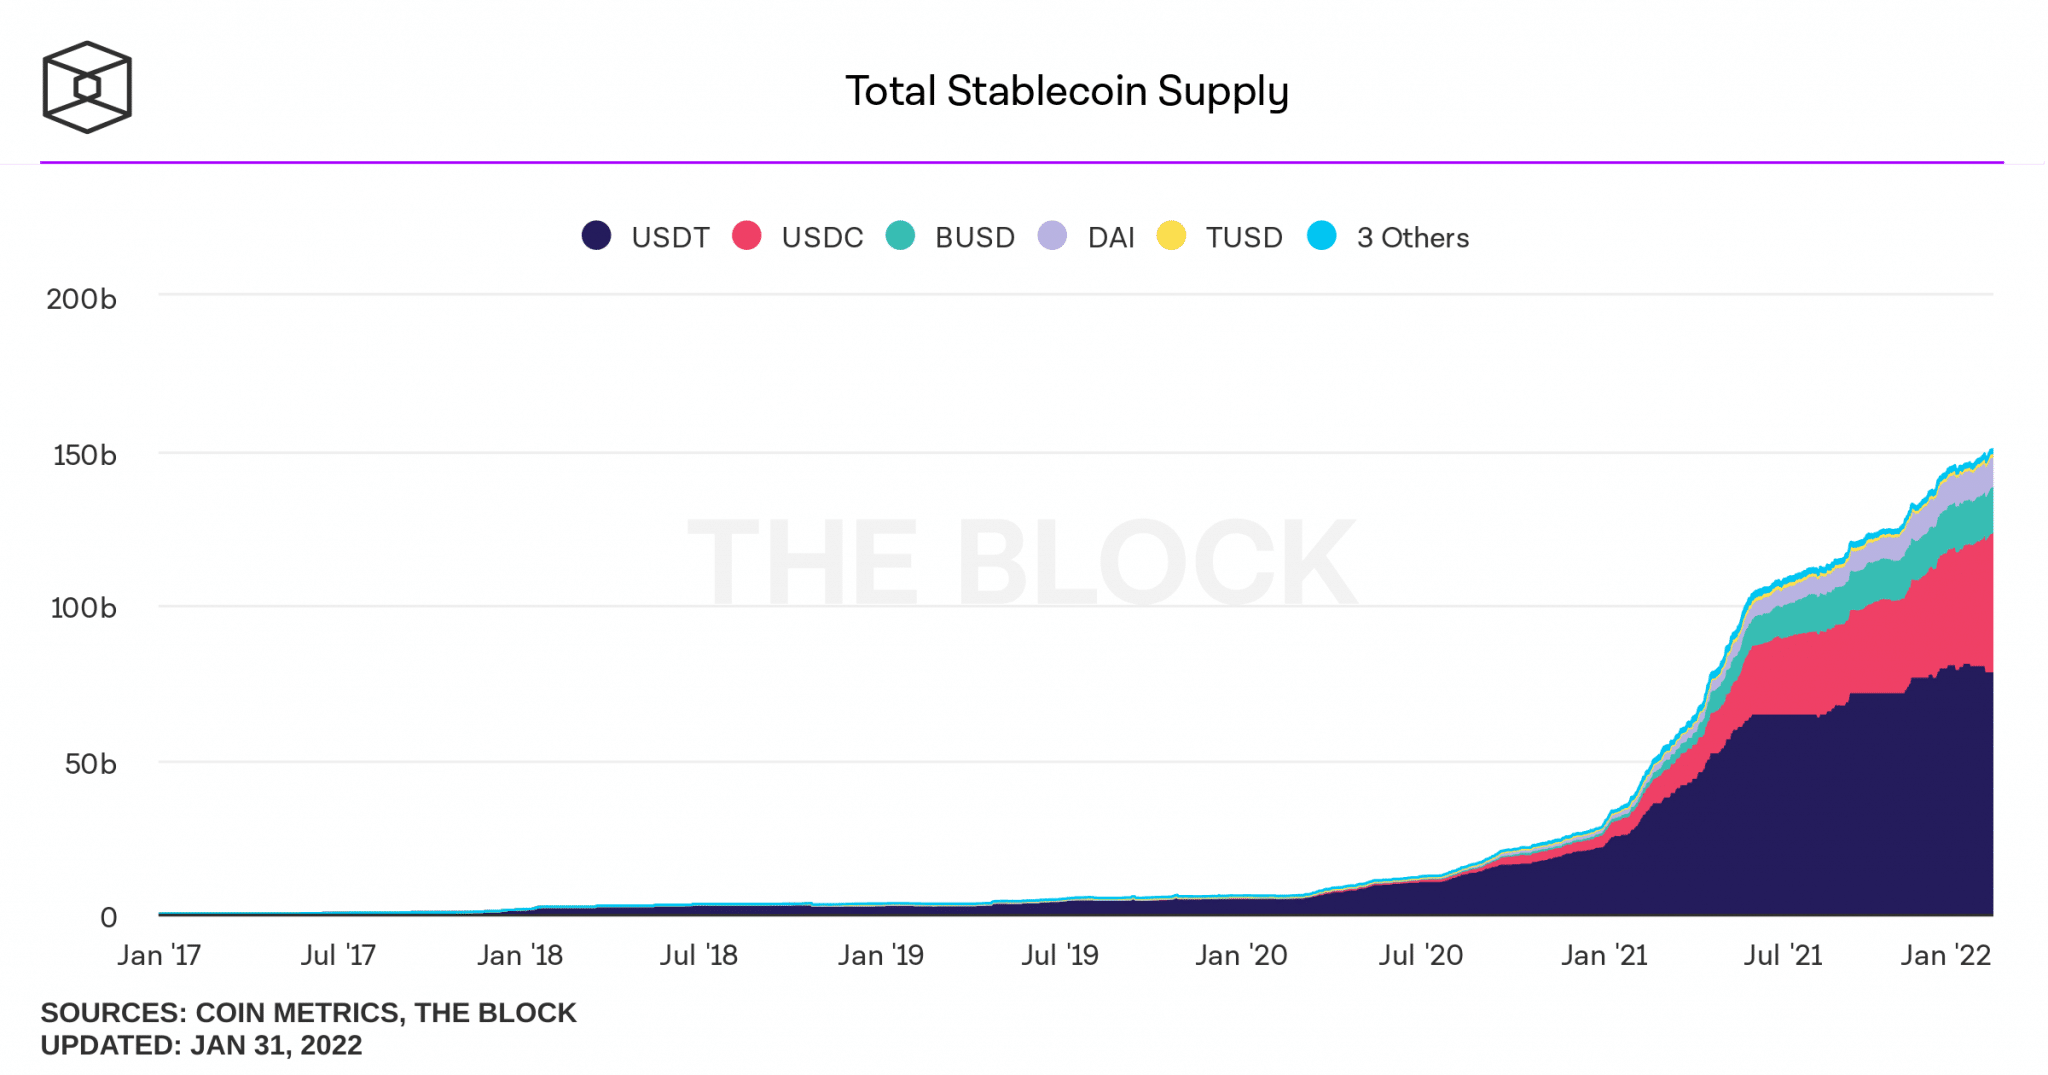 Evolution of stablecoin supply (Source: The Block)